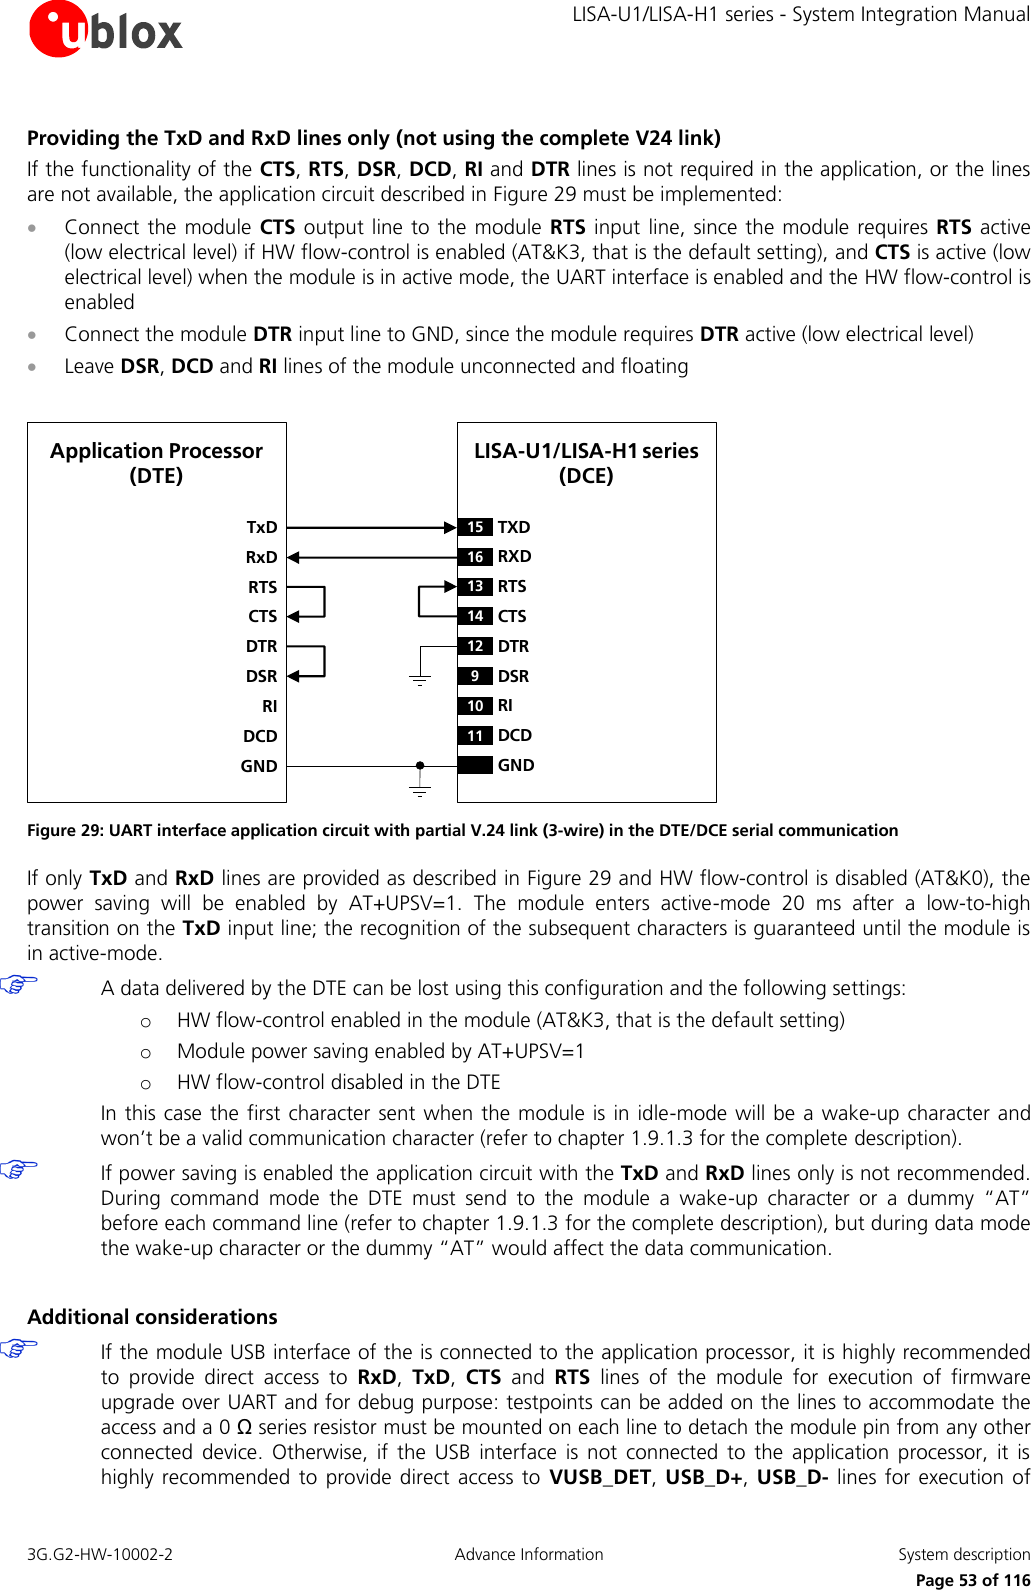     LISA-U1/LISA-H1 series - System Integration Manual 3G.G2-HW-10002-2  Advance Information  System description      Page 53 of 116 Providing the TxD and RxD lines only (not using the complete V24 link) If the functionality of the CTS, RTS, DSR, DCD, RI and DTR lines is not required in the application, or the lines are not available, the application circuit described in Figure 29 must be implemented:  Connect the module  CTS output  line to the module  RTS  input line, since the  module requires  RTS active (low electrical level) if HW flow-control is enabled (AT&amp;K3, that is the default setting), and CTS is active (low electrical level) when the module is in active mode, the UART interface is enabled and the HW flow-control is enabled  Connect the module DTR input line to GND, since the module requires DTR active (low electrical level)  Leave DSR, DCD and RI lines of the module unconnected and floating  LISA-U1/LISA-H1 series(DCE)TxDApplication Processor  (DTE)RxDRTSCTSDTRDSRRIDCDGND15 TXD12 DTR16 RXD13 RTS14 CTS9DSR10 RI11 DCDGND Figure 29: UART interface application circuit with partial V.24 link (3-wire) in the DTE/DCE serial communication If only TxD and RxD lines are provided as described in Figure 29 and HW flow-control is disabled (AT&amp;K0), the power  saving  will  be  enabled  by  AT+UPSV=1.  The  module  enters  active-mode  20  ms  after  a  low-to-high transition on the TxD input line; the recognition of the subsequent characters is guaranteed until the module is in active-mode.  A data delivered by the DTE can be lost using this configuration and the following settings: o HW flow-control enabled in the module (AT&amp;K3, that is the default setting) o Module power saving enabled by AT+UPSV=1 o HW flow-control disabled in the DTE In this case the first character sent when the module is in idle-mode will be a wake-up character and won’t be a valid communication character (refer to chapter 1.9.1.3 for the complete description).  If power saving is enabled the application circuit with the TxD and RxD lines only is not recommended. During  command  mode  the  DTE  must  send  to  the  module  a  wake-up  character  or  a  dummy  “AT” before each command line (refer to chapter 1.9.1.3 for the complete description), but during data mode the wake-up character or the dummy “AT” would affect the data communication.  Additional considerations  If the module USB interface of the is connected to the application processor, it is highly recommended to  provide  direct  access  to  RxD,  TxD,  CTS  and  RTS  lines  of  the  module  for  execution  of  firmware upgrade over UART and for debug purpose: testpoints can be added on the lines to accommodate the access and a 0 Ω series resistor must be mounted on each line to detach the module pin from any other connected  device.  Otherwise,  if  the  USB  interface  is  not  connected  to  the  application  processor,  it  is highly recommended  to  provide direct access  to  VUSB_DET,  USB_D+, USB_D-  lines for  execution  of 